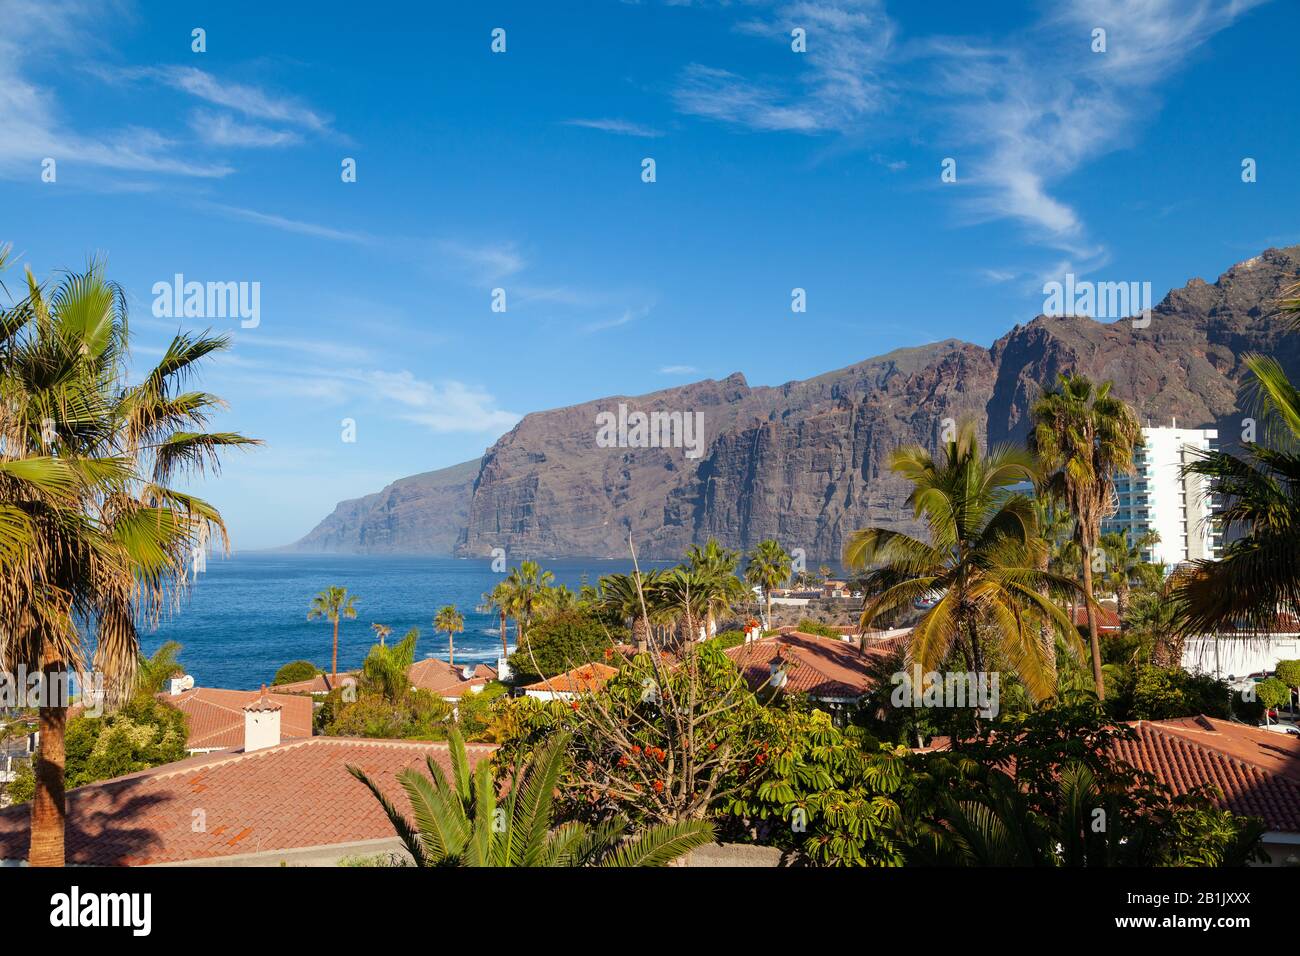 The cliffs at Los Gigantes, Tenerife, Canary Islands, Spain Stock Photo